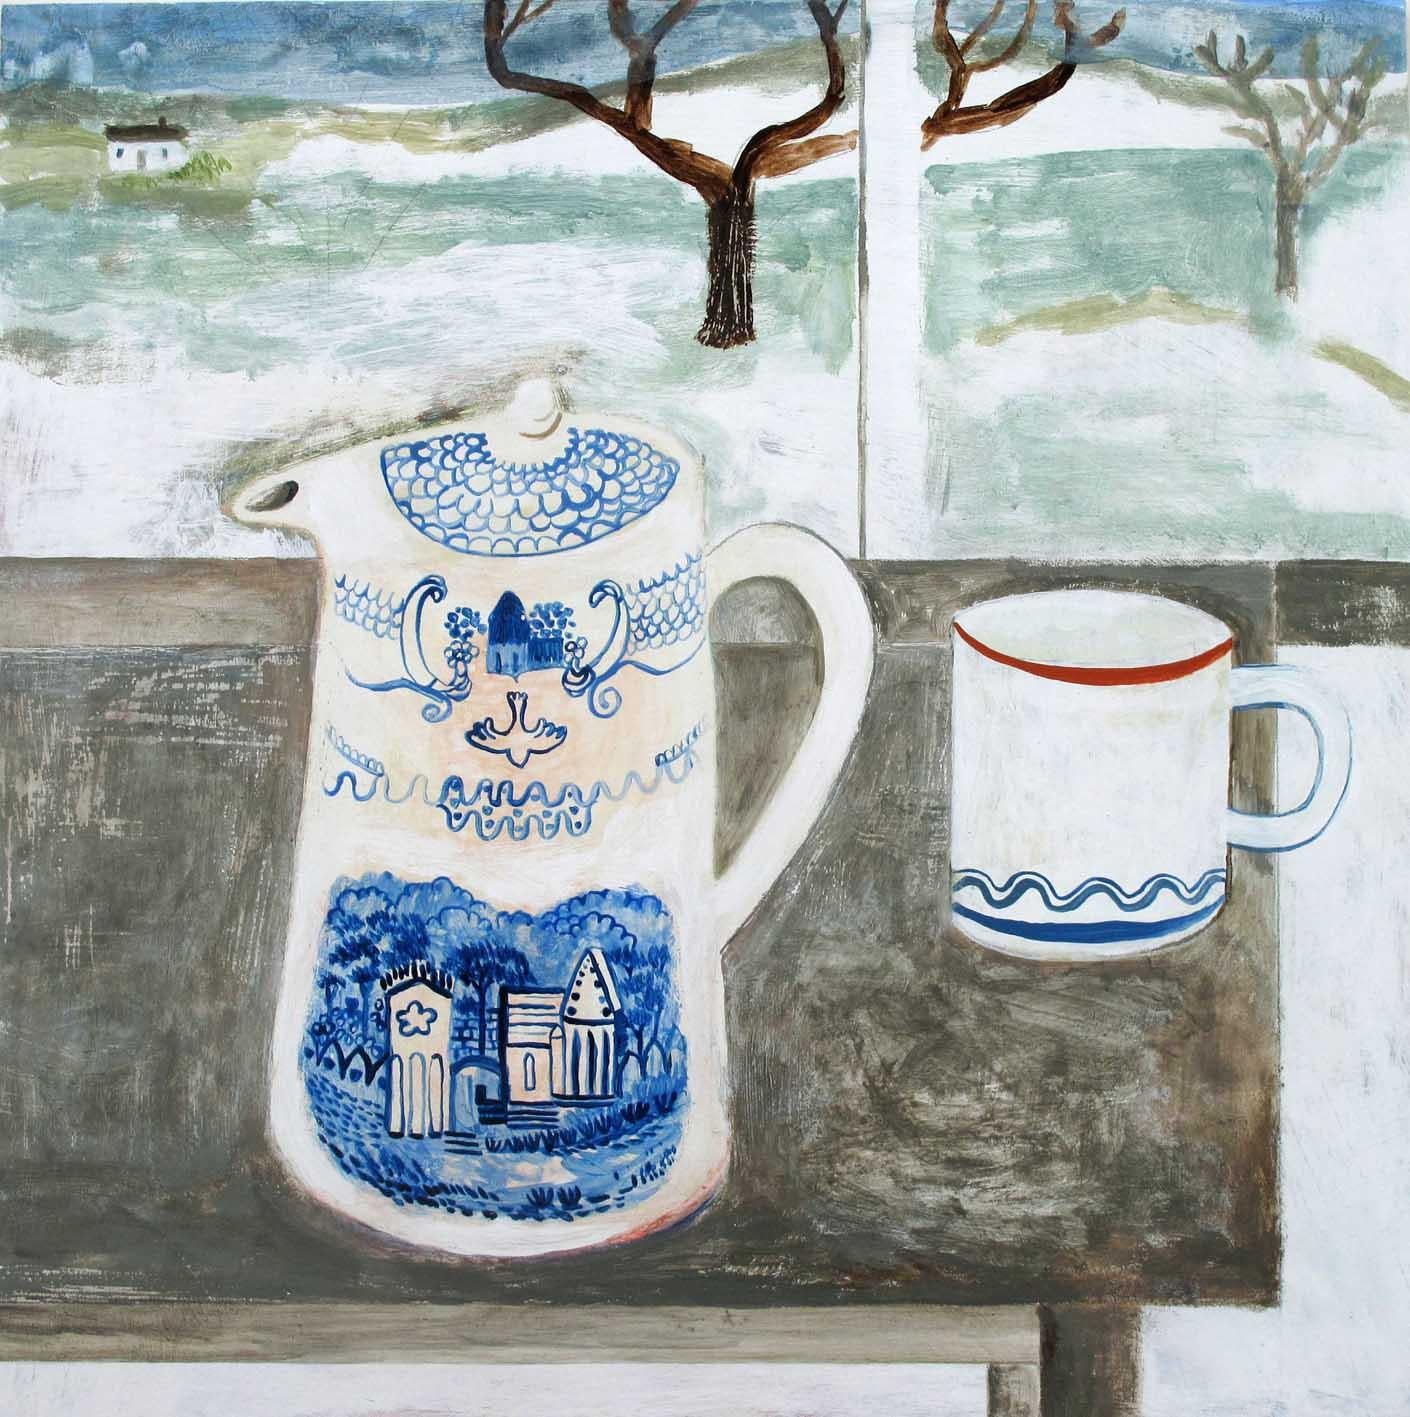 Andrea Humphries

Abbey Jug

Original Still Life Painting

Acrylic Paint and Mixed Media on Gesso Board

Size: H 36cm x W 36cm x D 3.5cm

White Frame Under Glass

 

Abbey Jug is an original painting by Andrea Humphries. The still life looks out